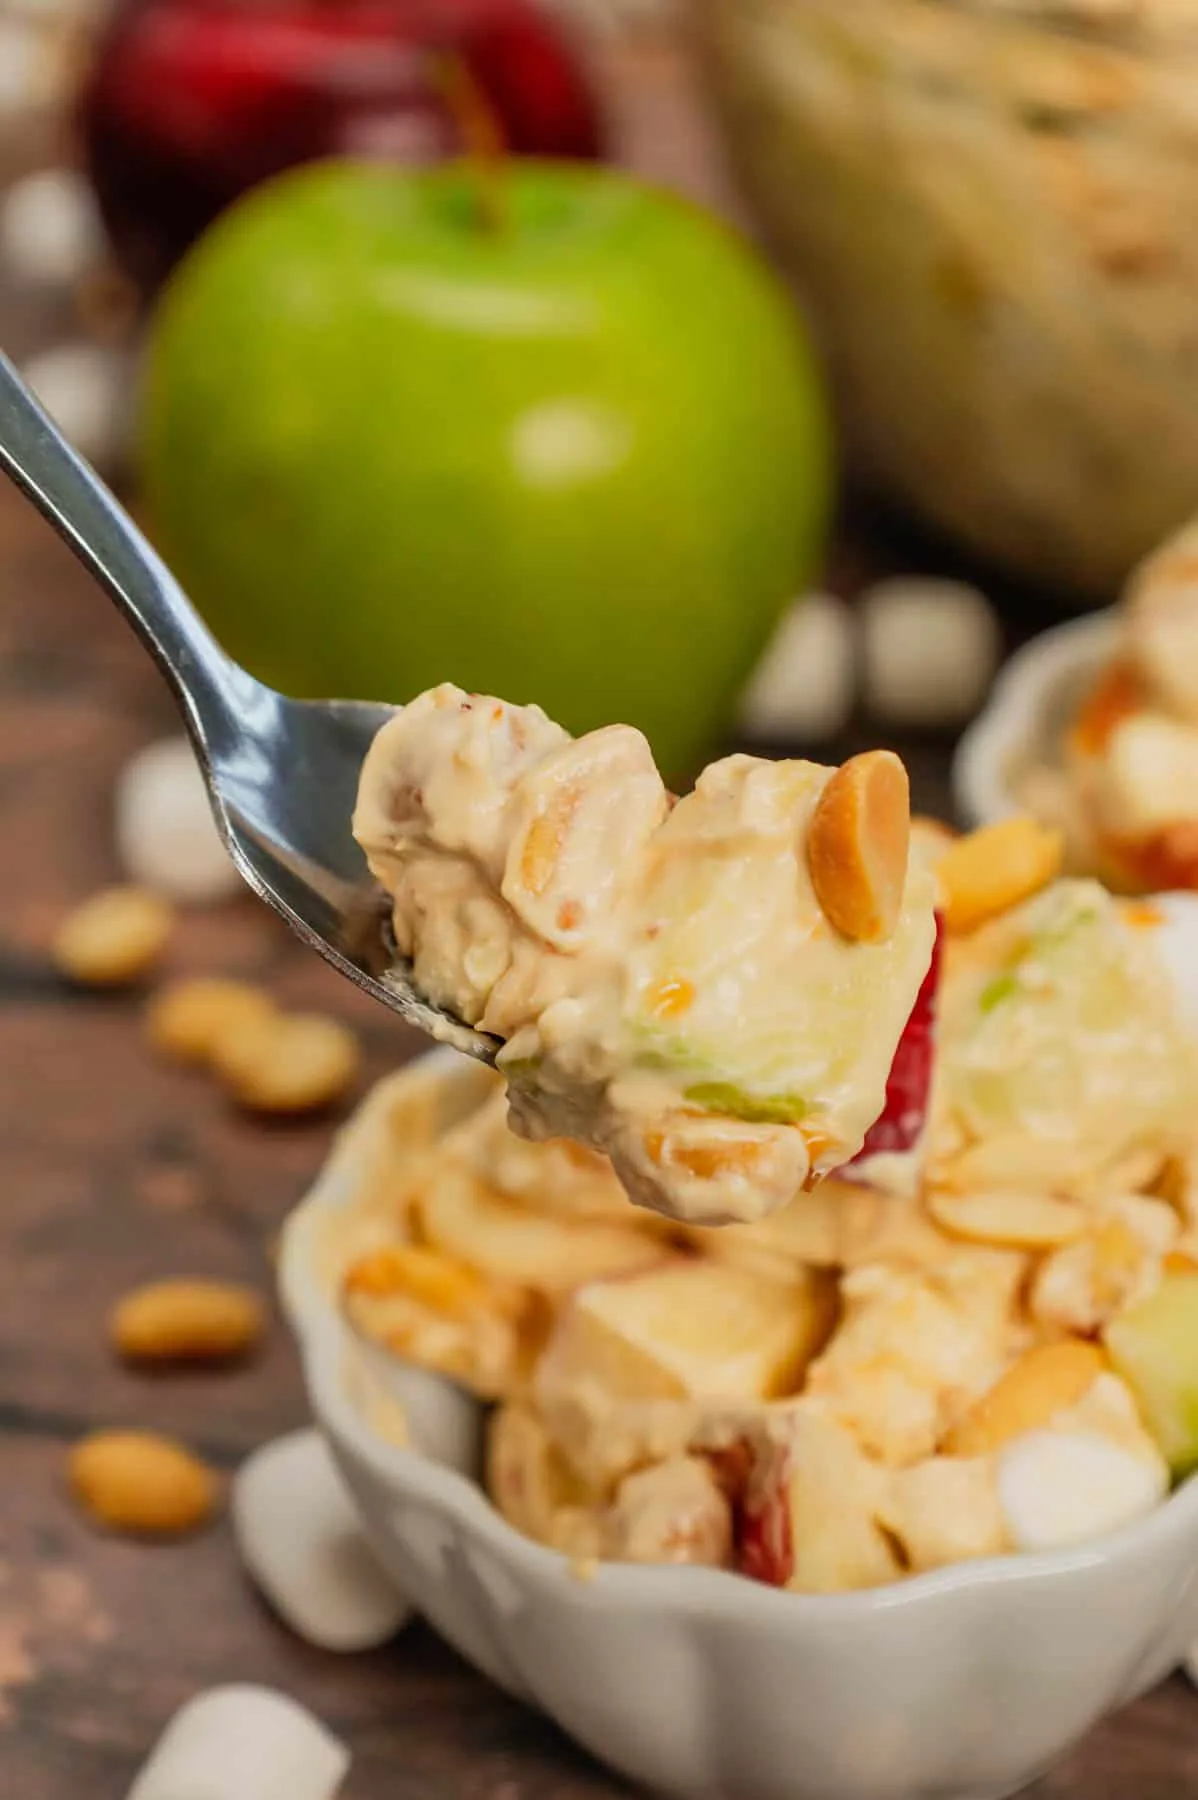 Taffy Apple Salad is a delicious no bake dessert recipe loaded with diced apples, peanuts, Skor bits and mini marshmallows all tossed in a Cool Whip and vanilla pudding mixture.